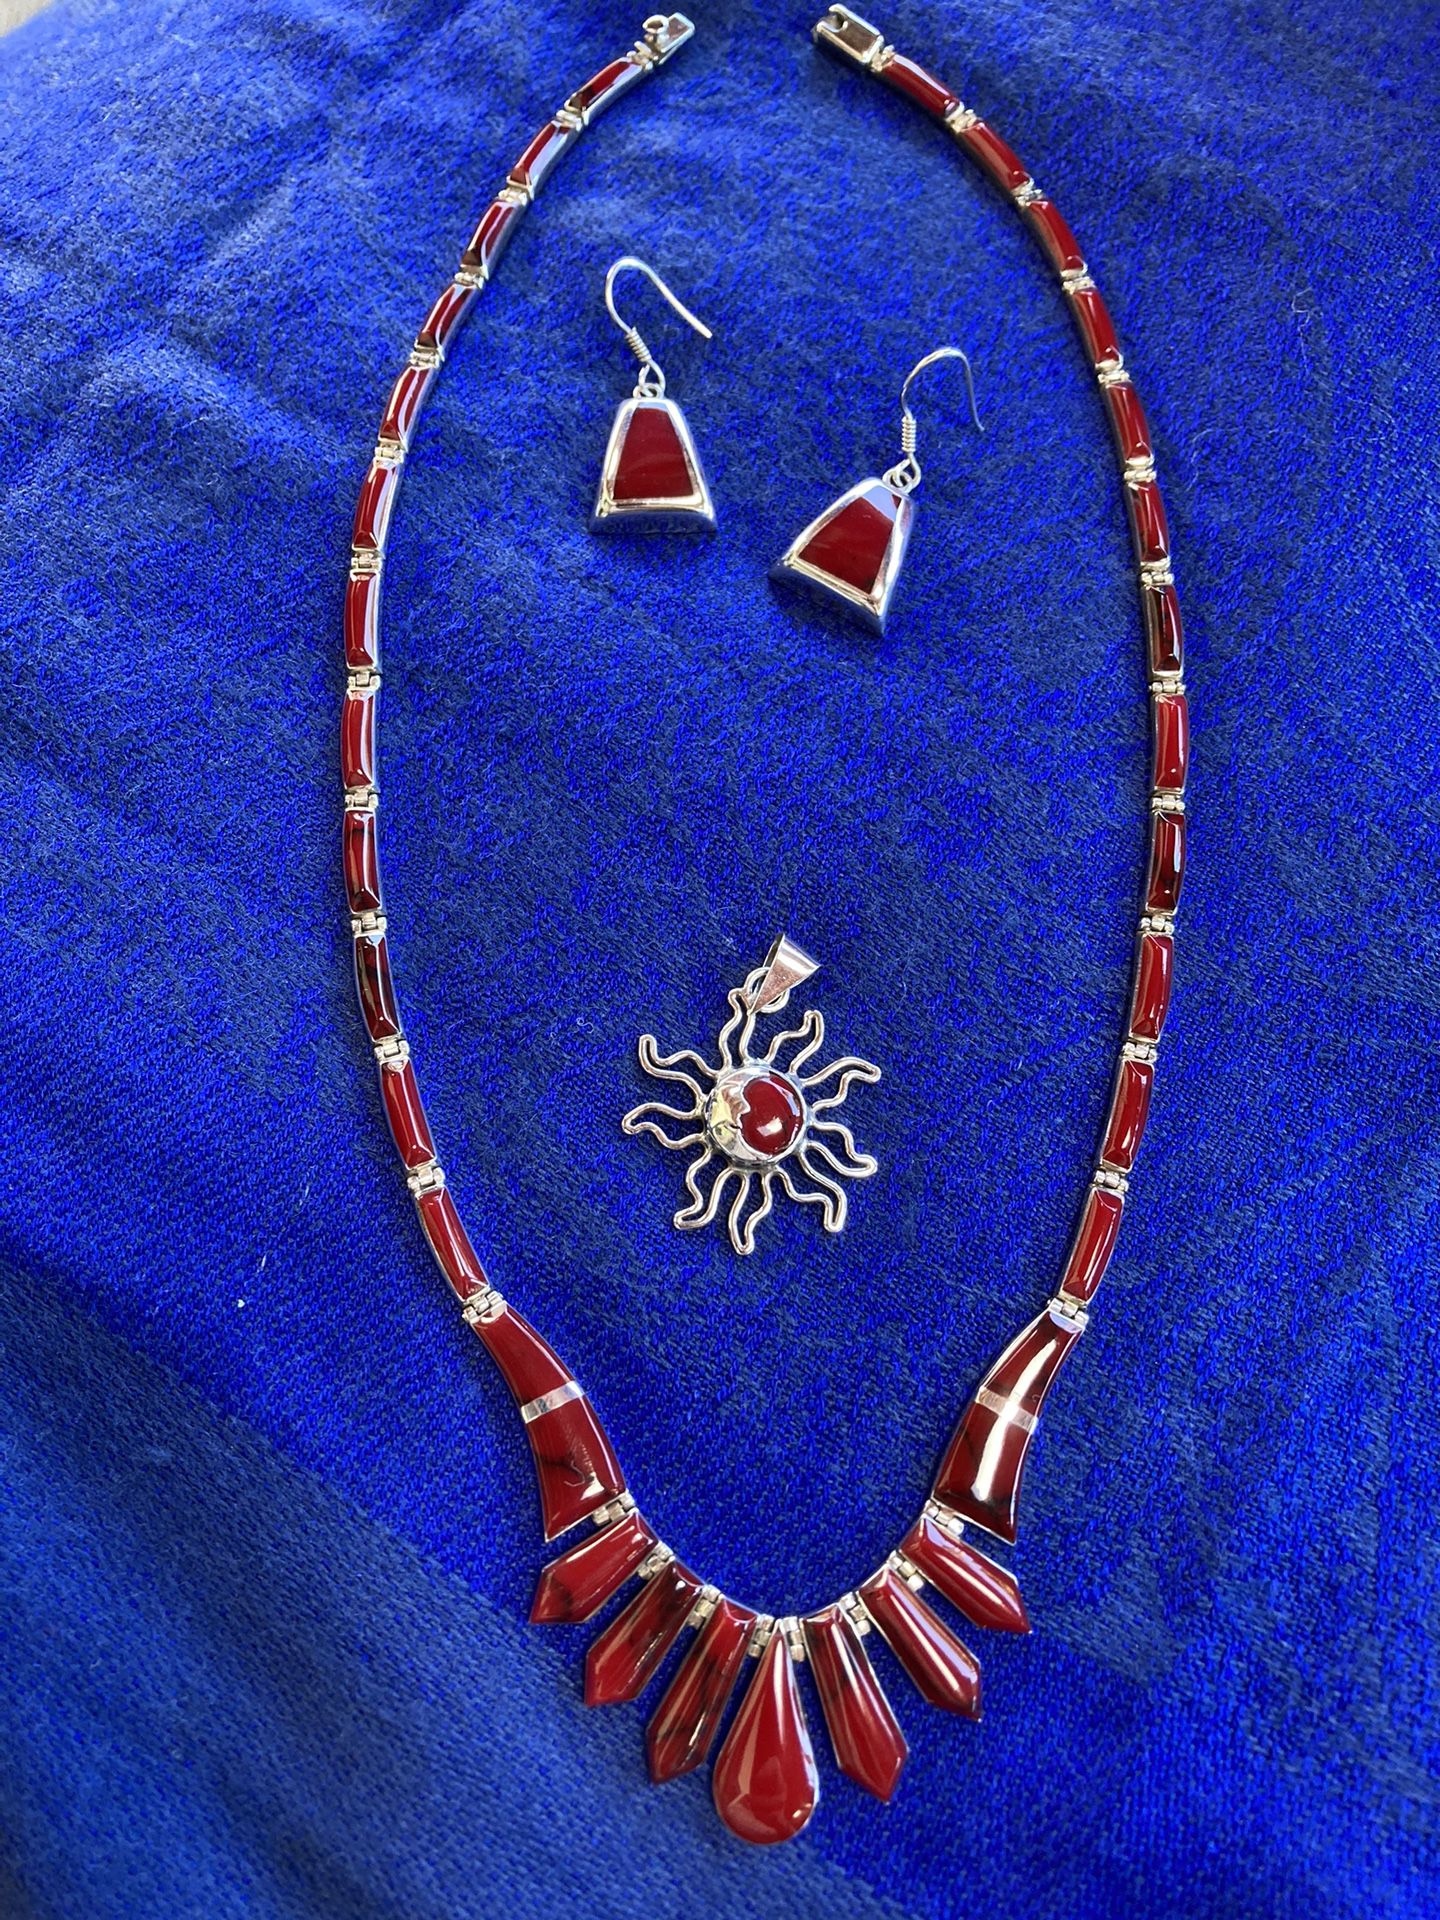  Taxco 925 Silver Jasper Red Necklace, Earrings and Pendant